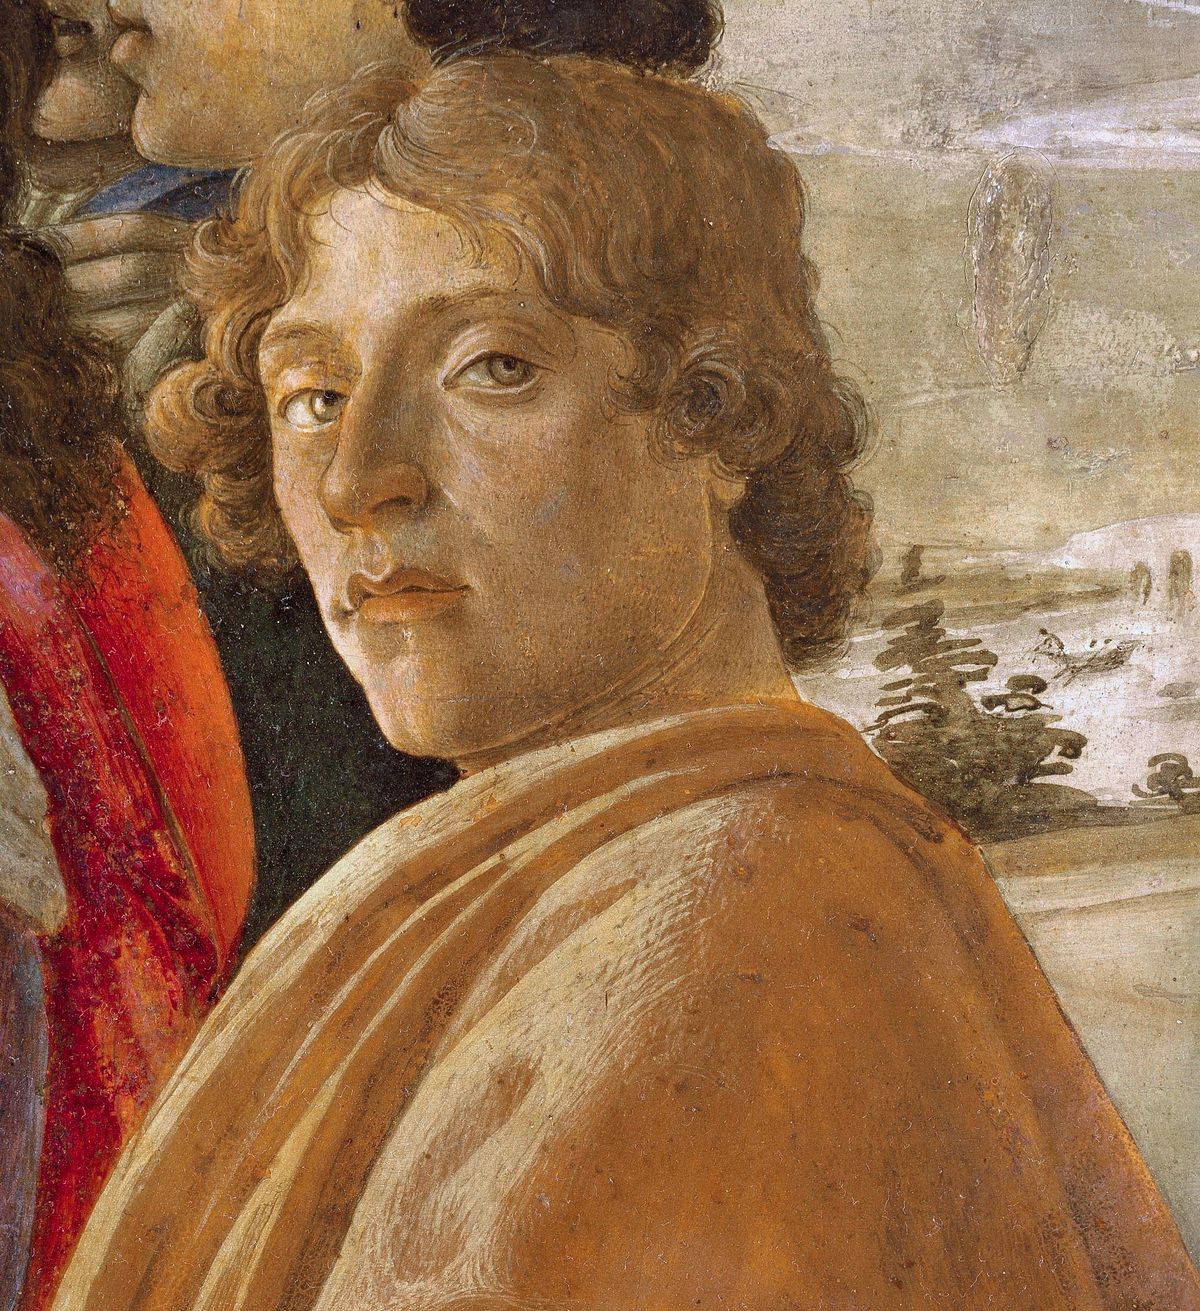 Probable self-portrait of Botticelli, in his Adoration of the Magi (1475).